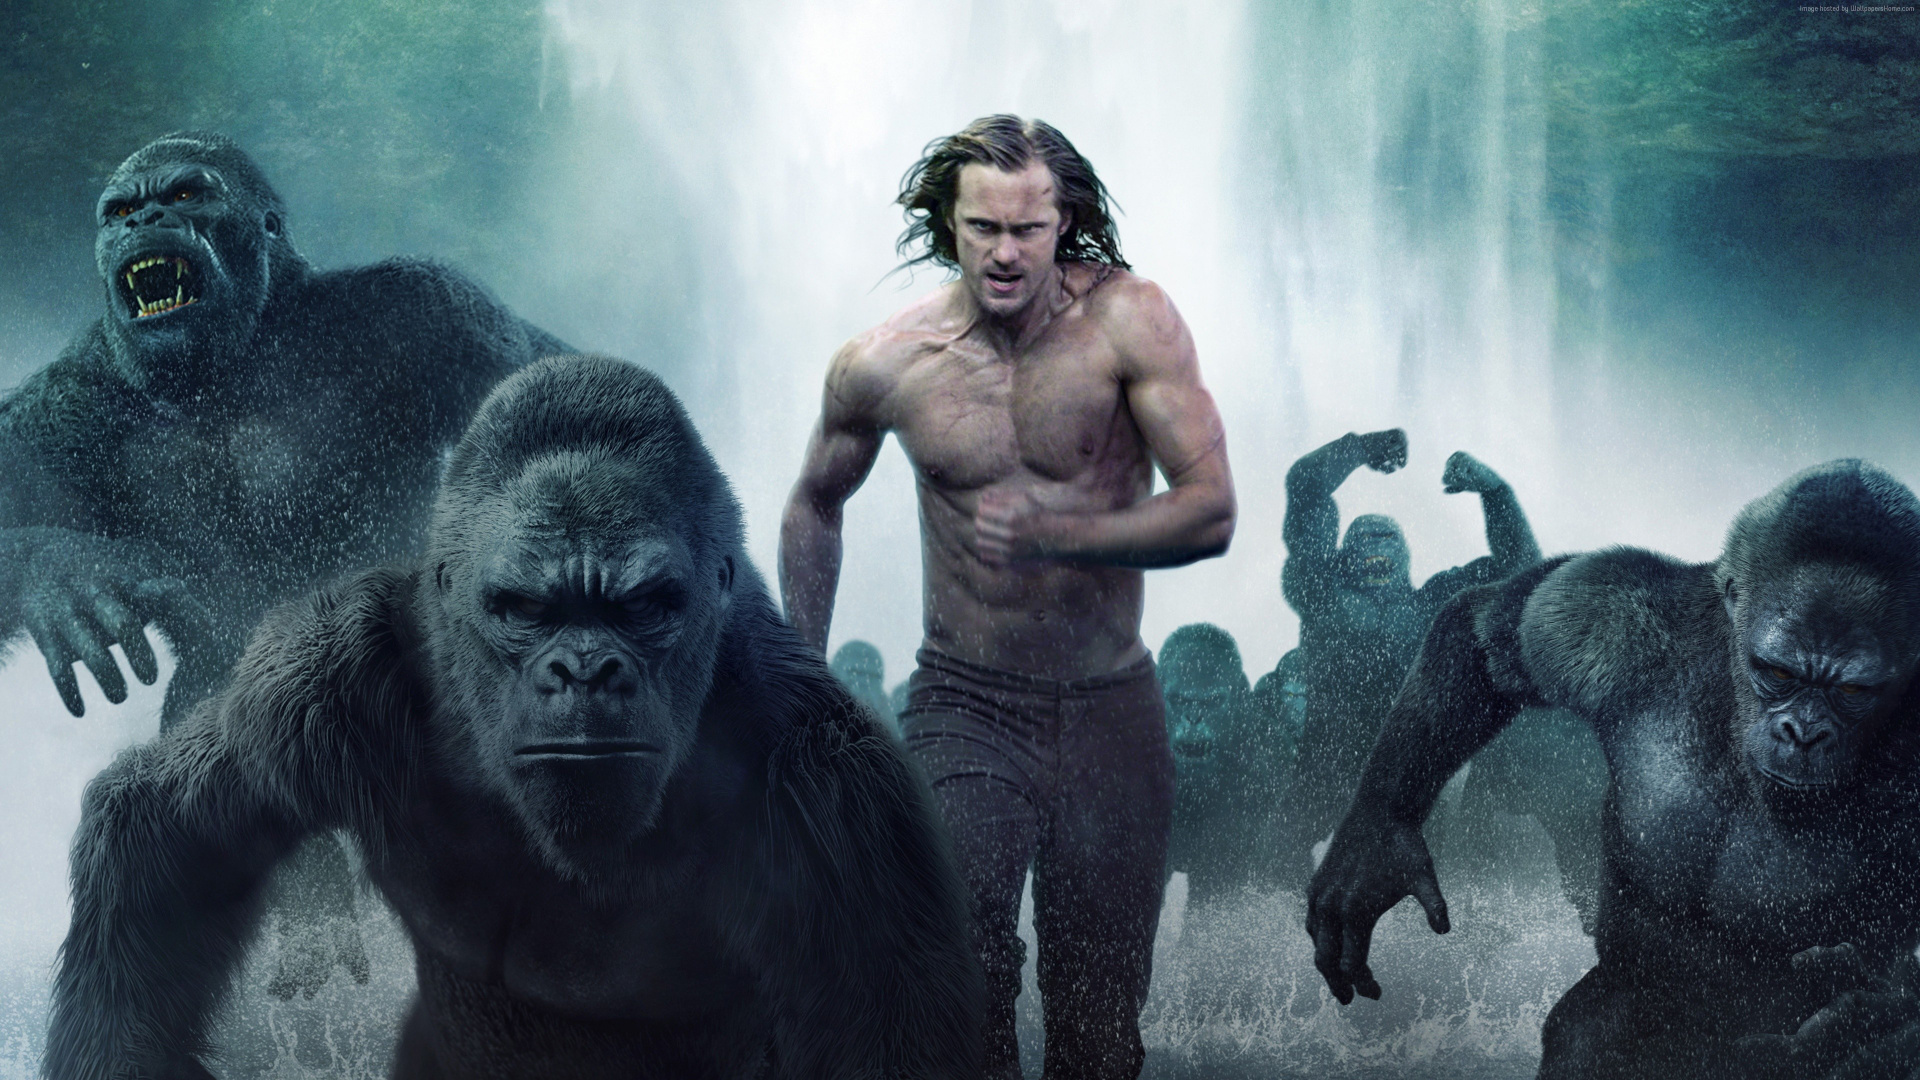 Topless Man and Gorilla in The Forest. Wallpaper in 1920x1080 Resolution